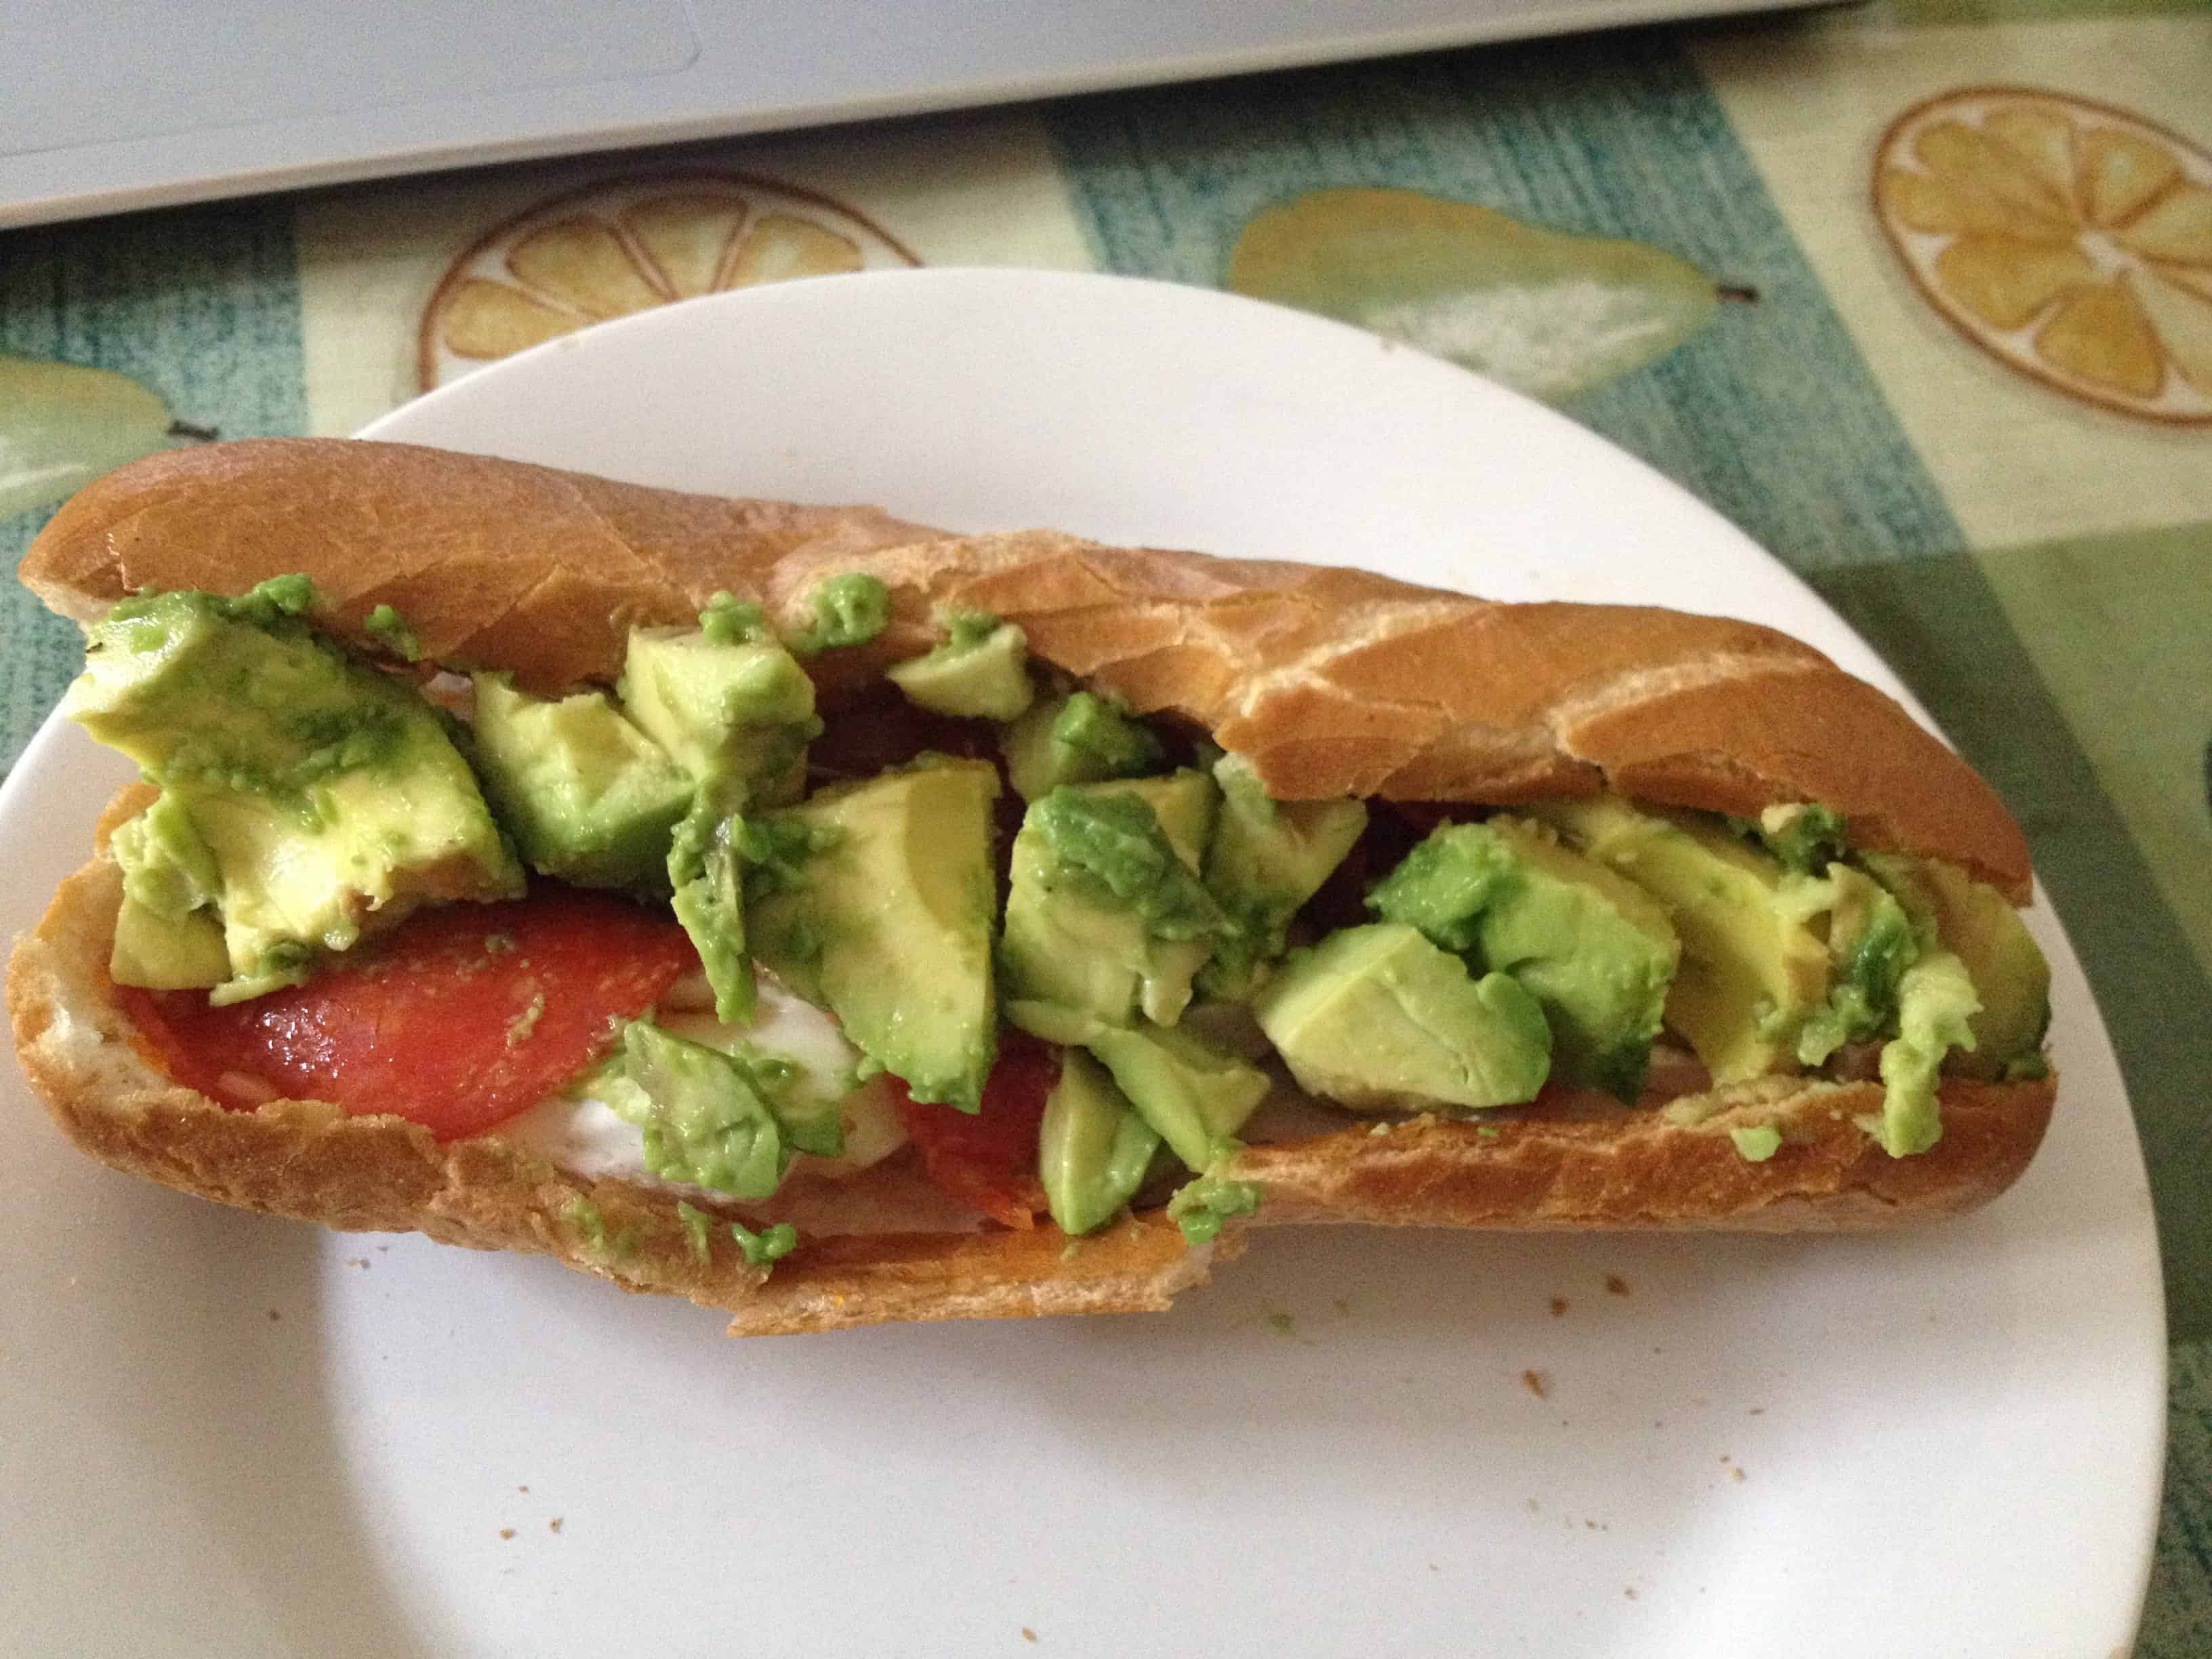 This sandwich is so epic it deserves its own appreciation club...